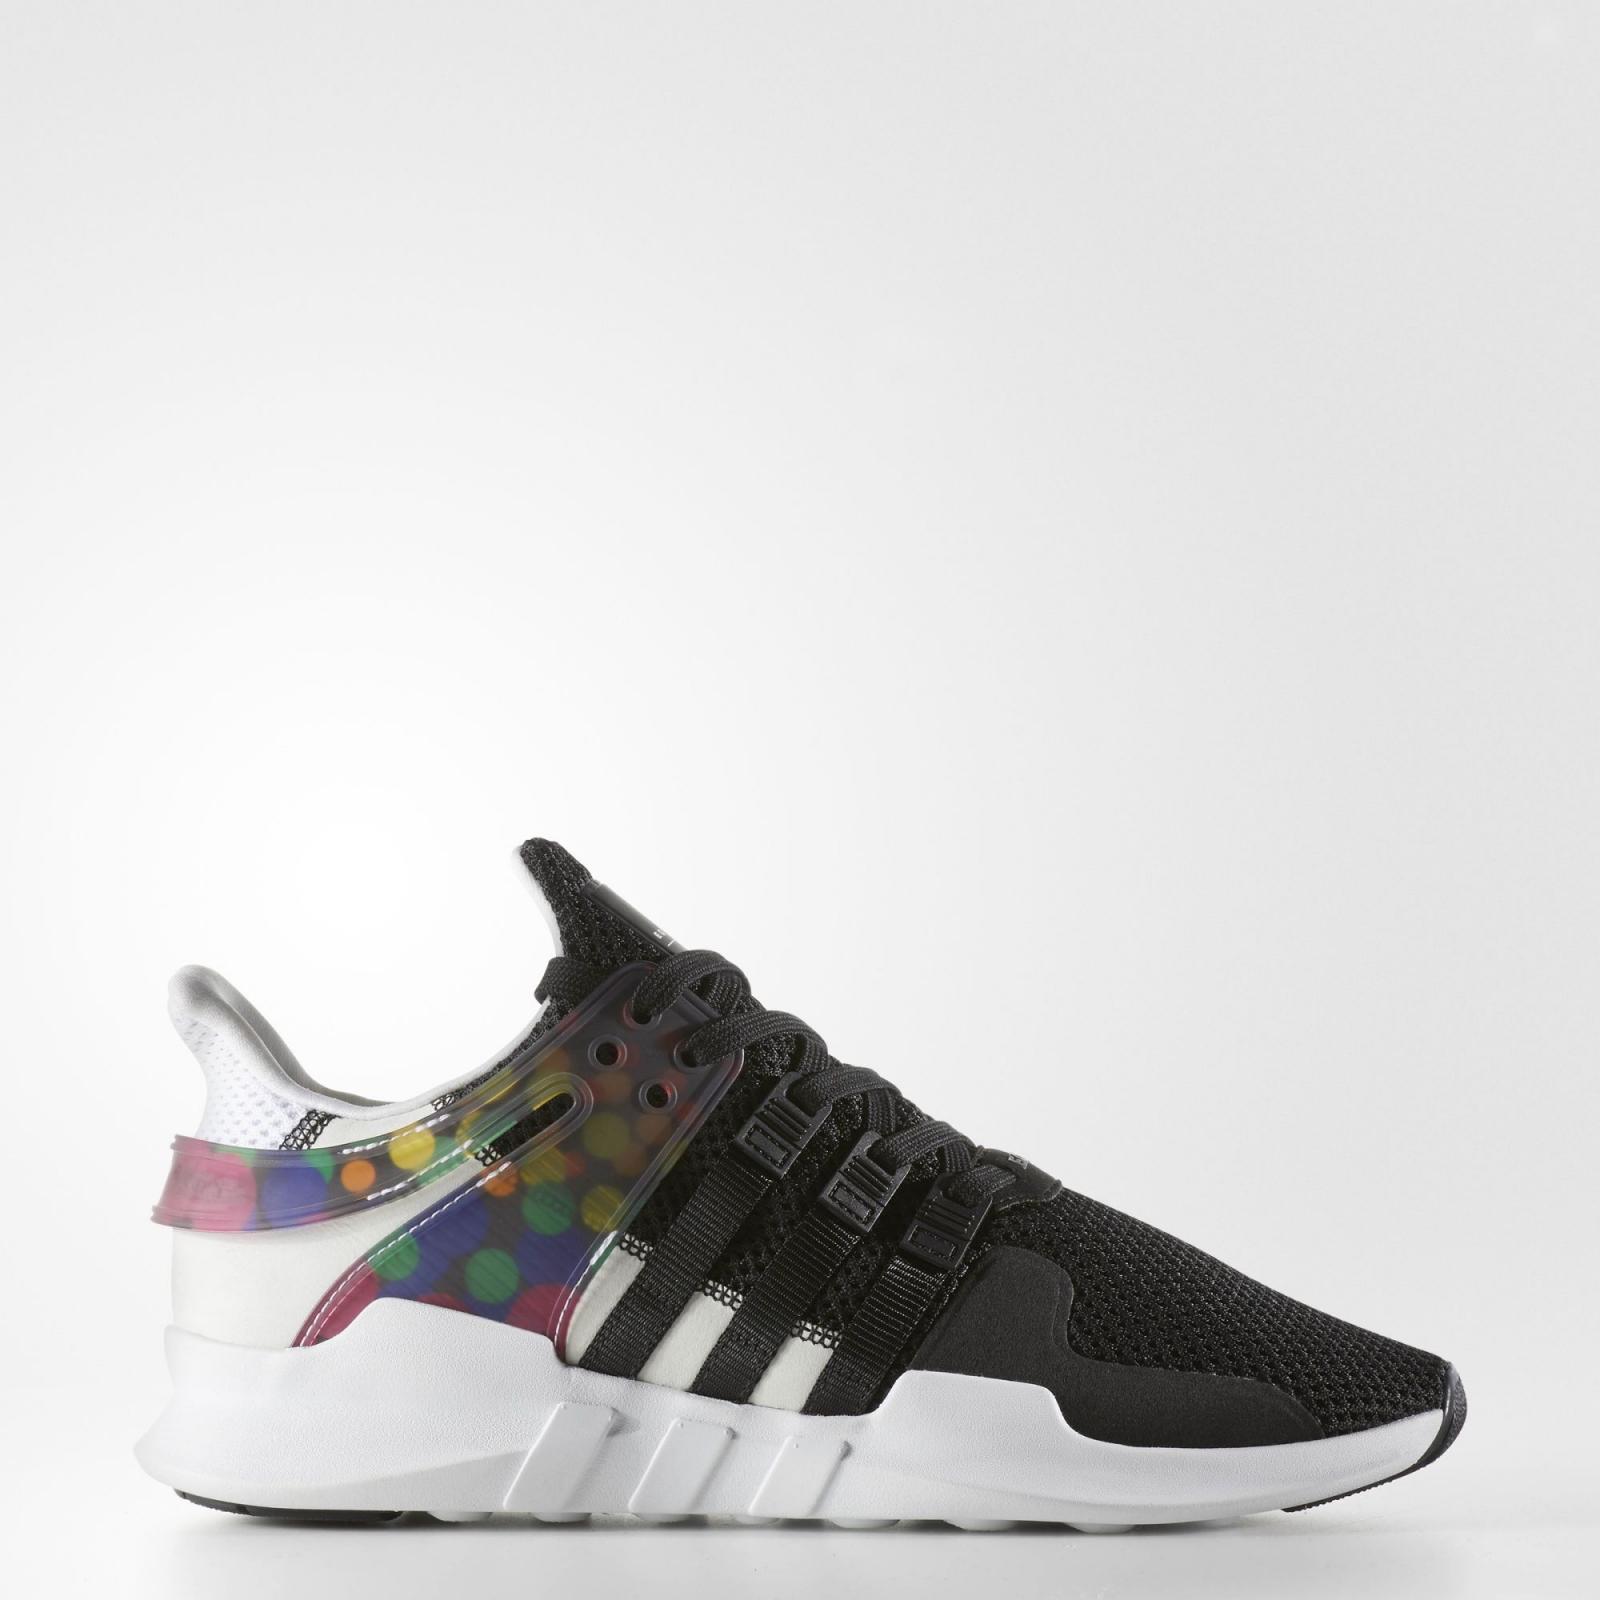 ADIDAS EQT SUPPORT ADV PRIDE PACK